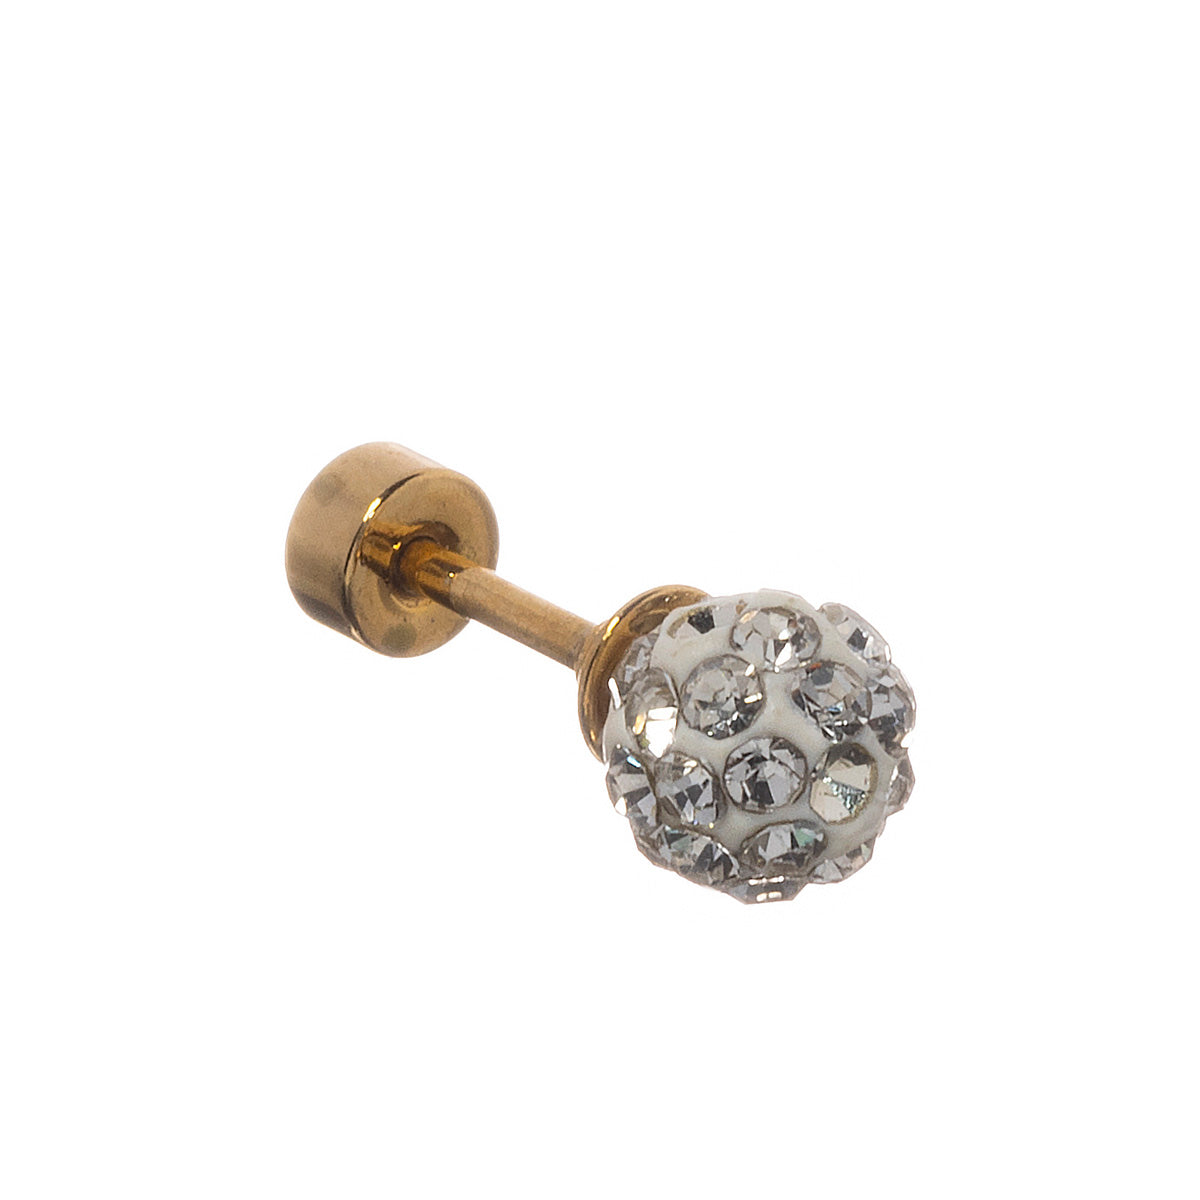 Cartilage ball with a stone ball of 1.2mm (steel 316l)